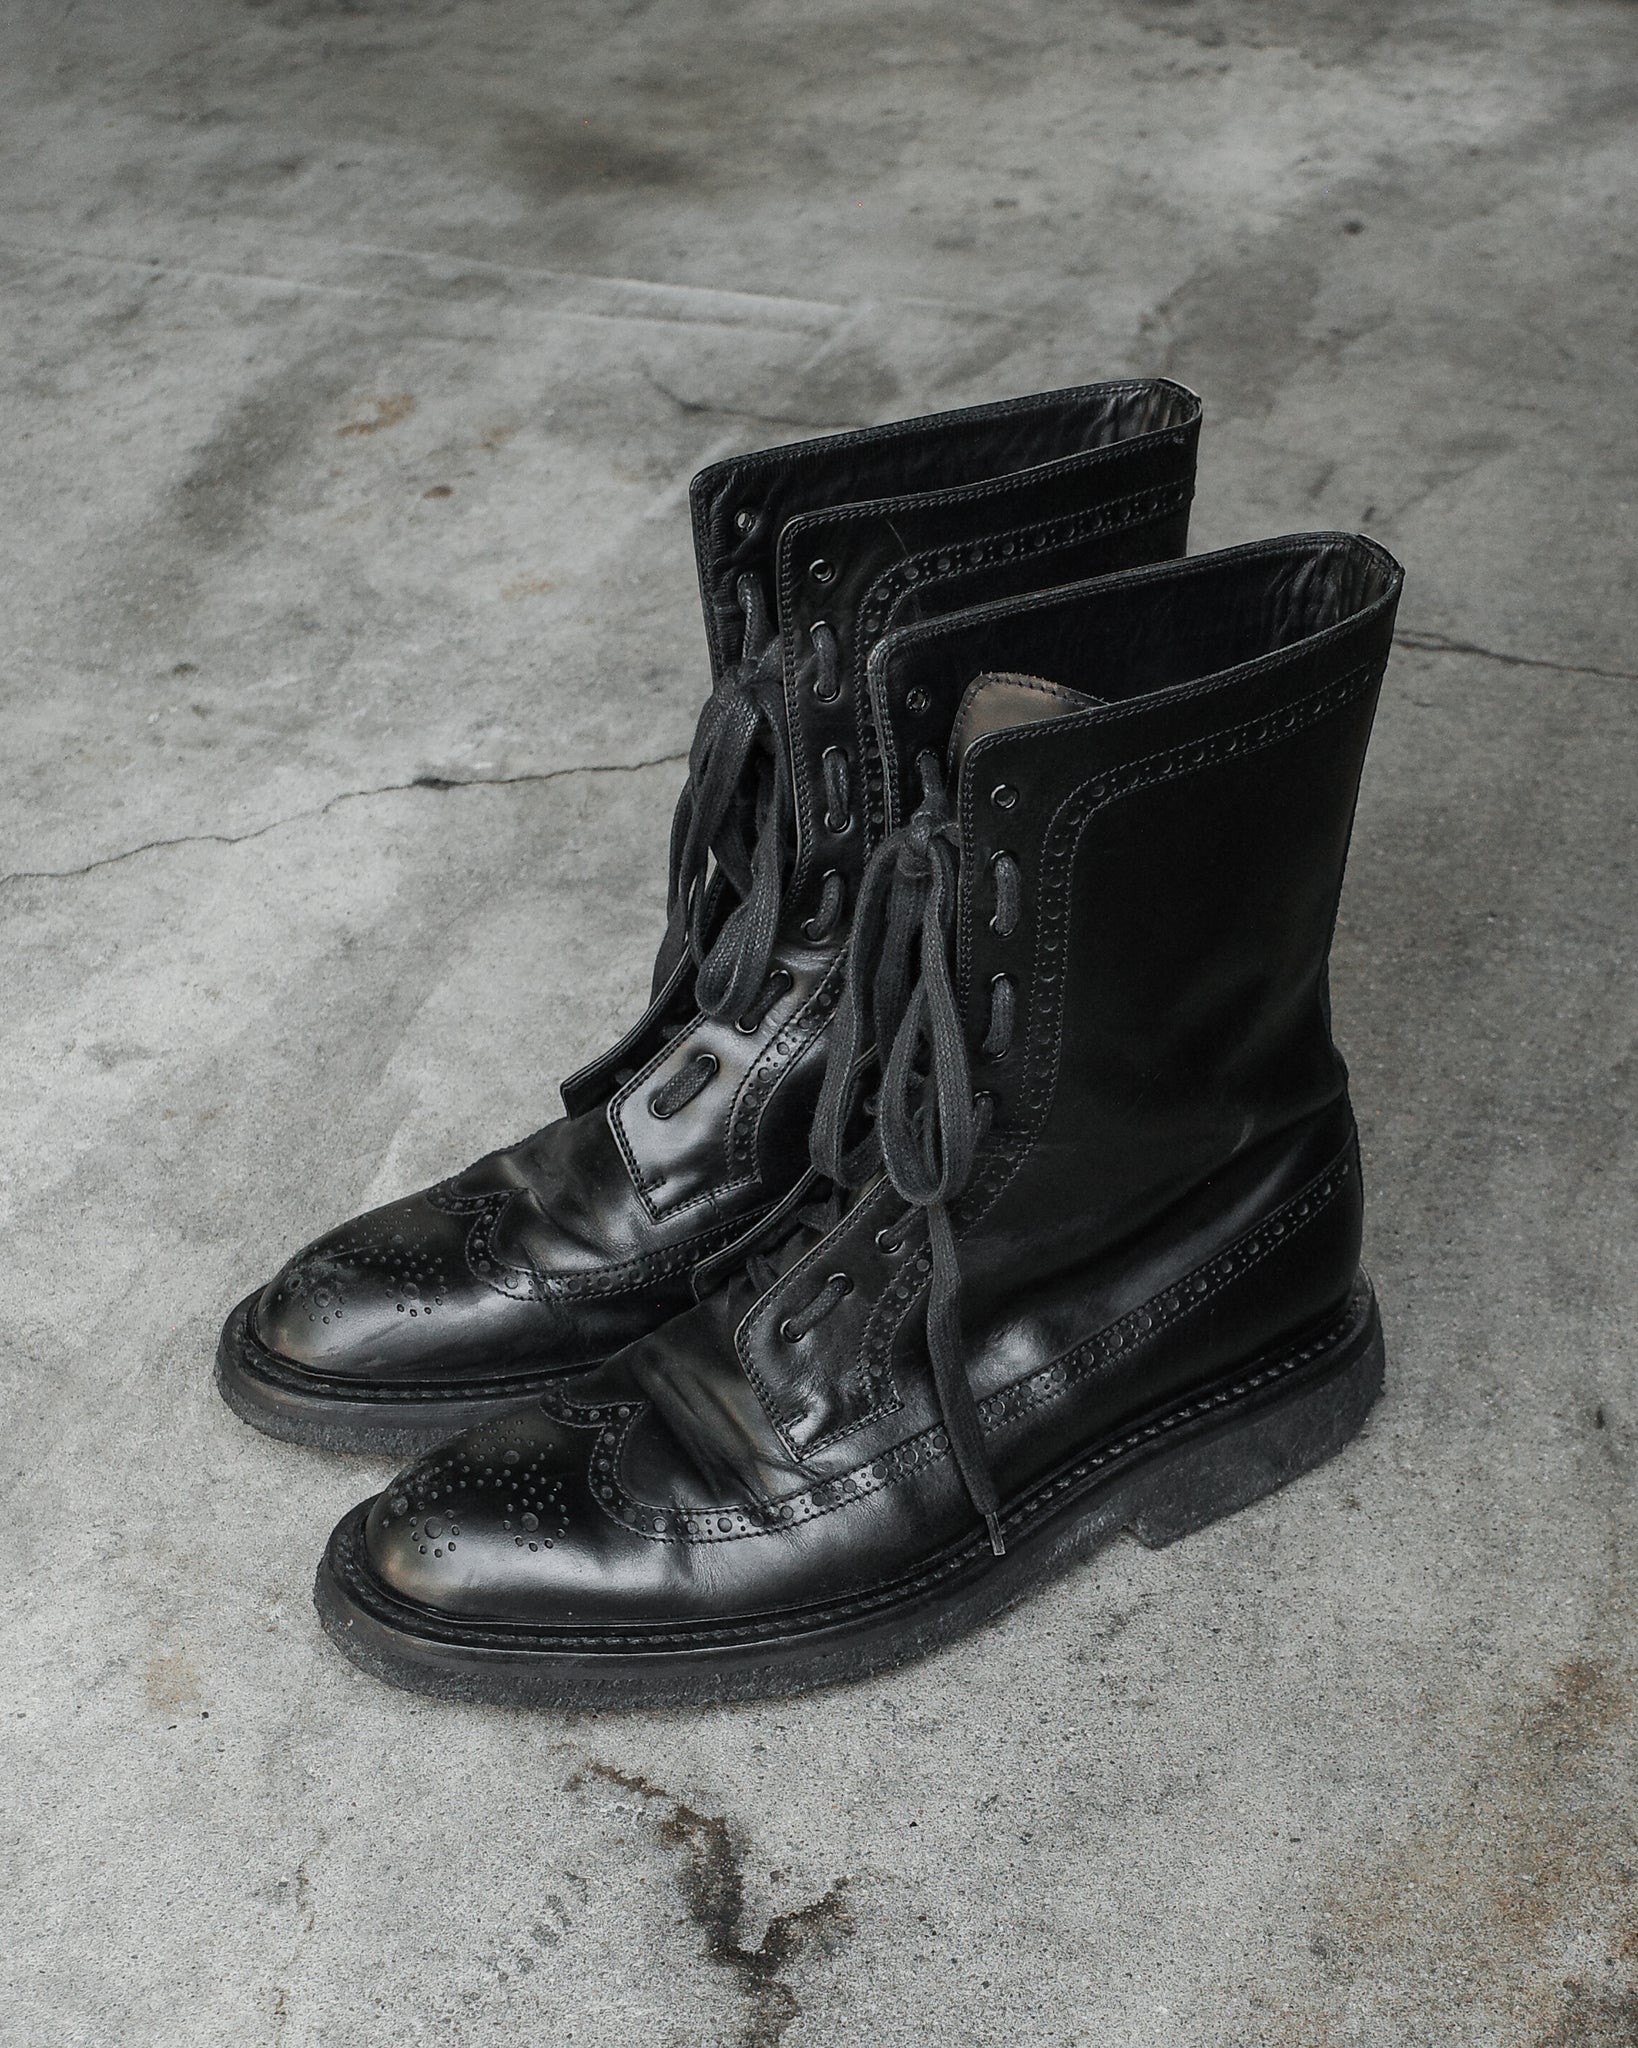 Dior Homme AW07 Navigate Patterned Boots